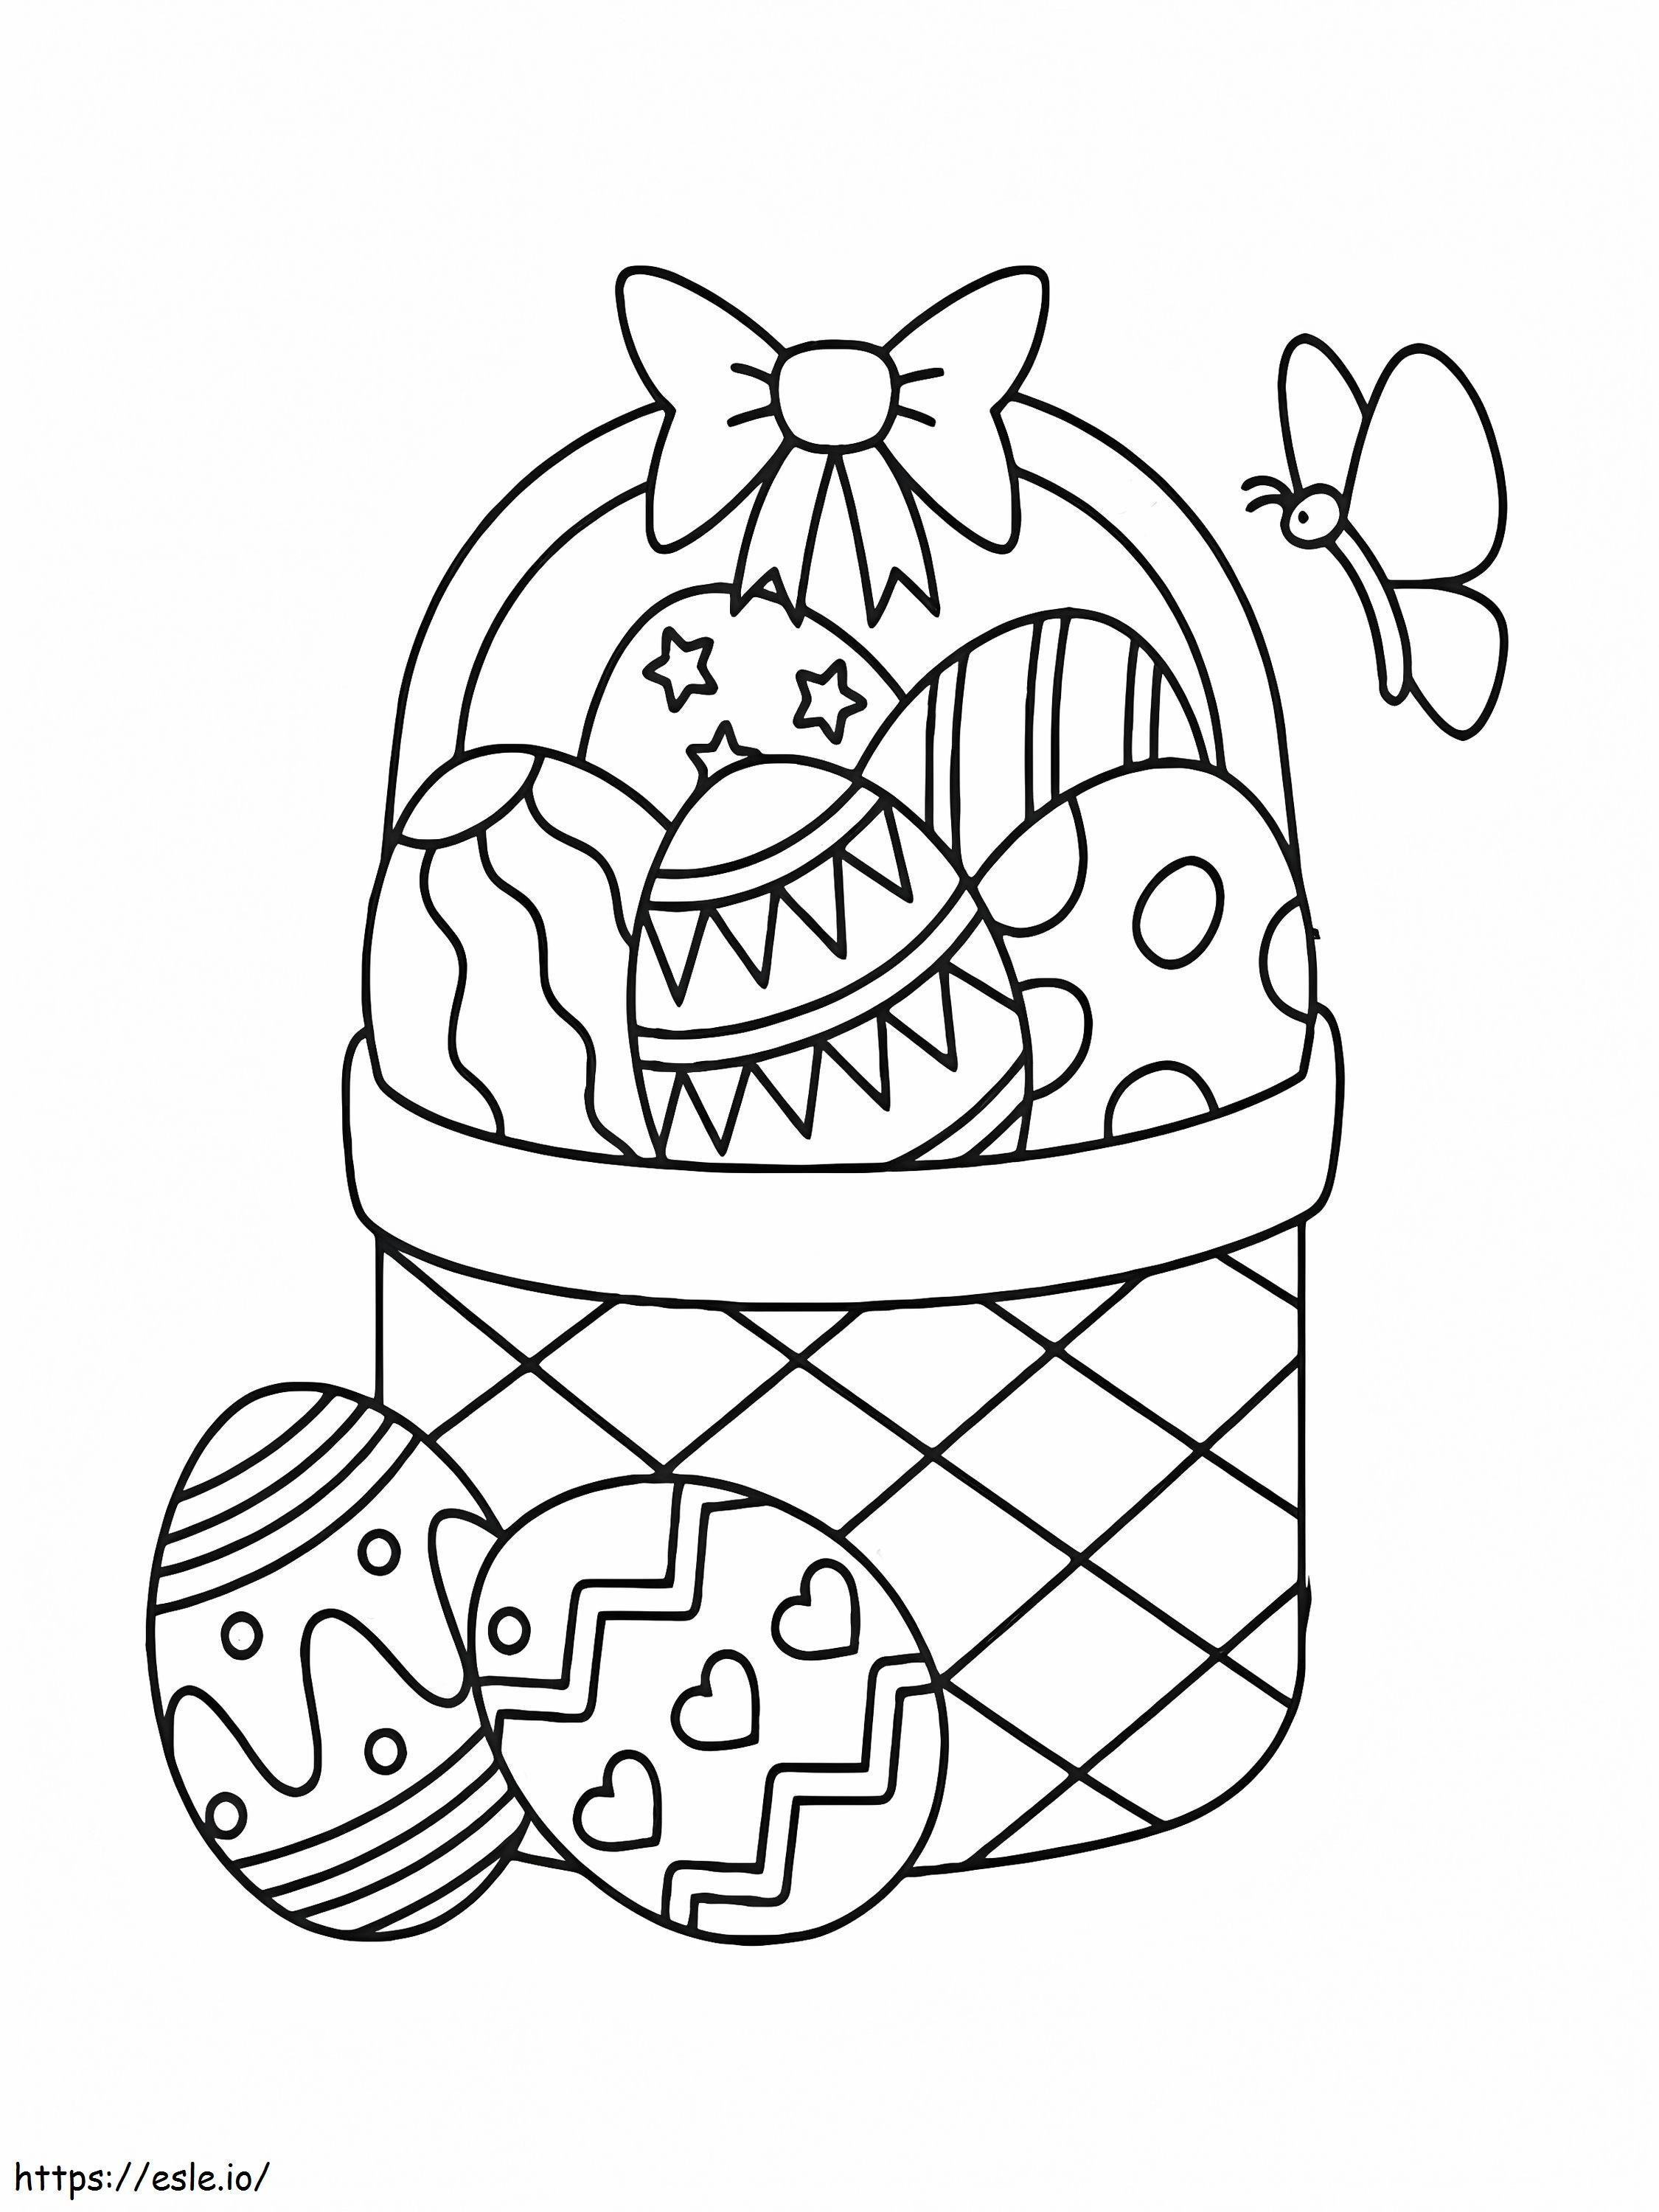 Easter Eggs In Basket coloring page